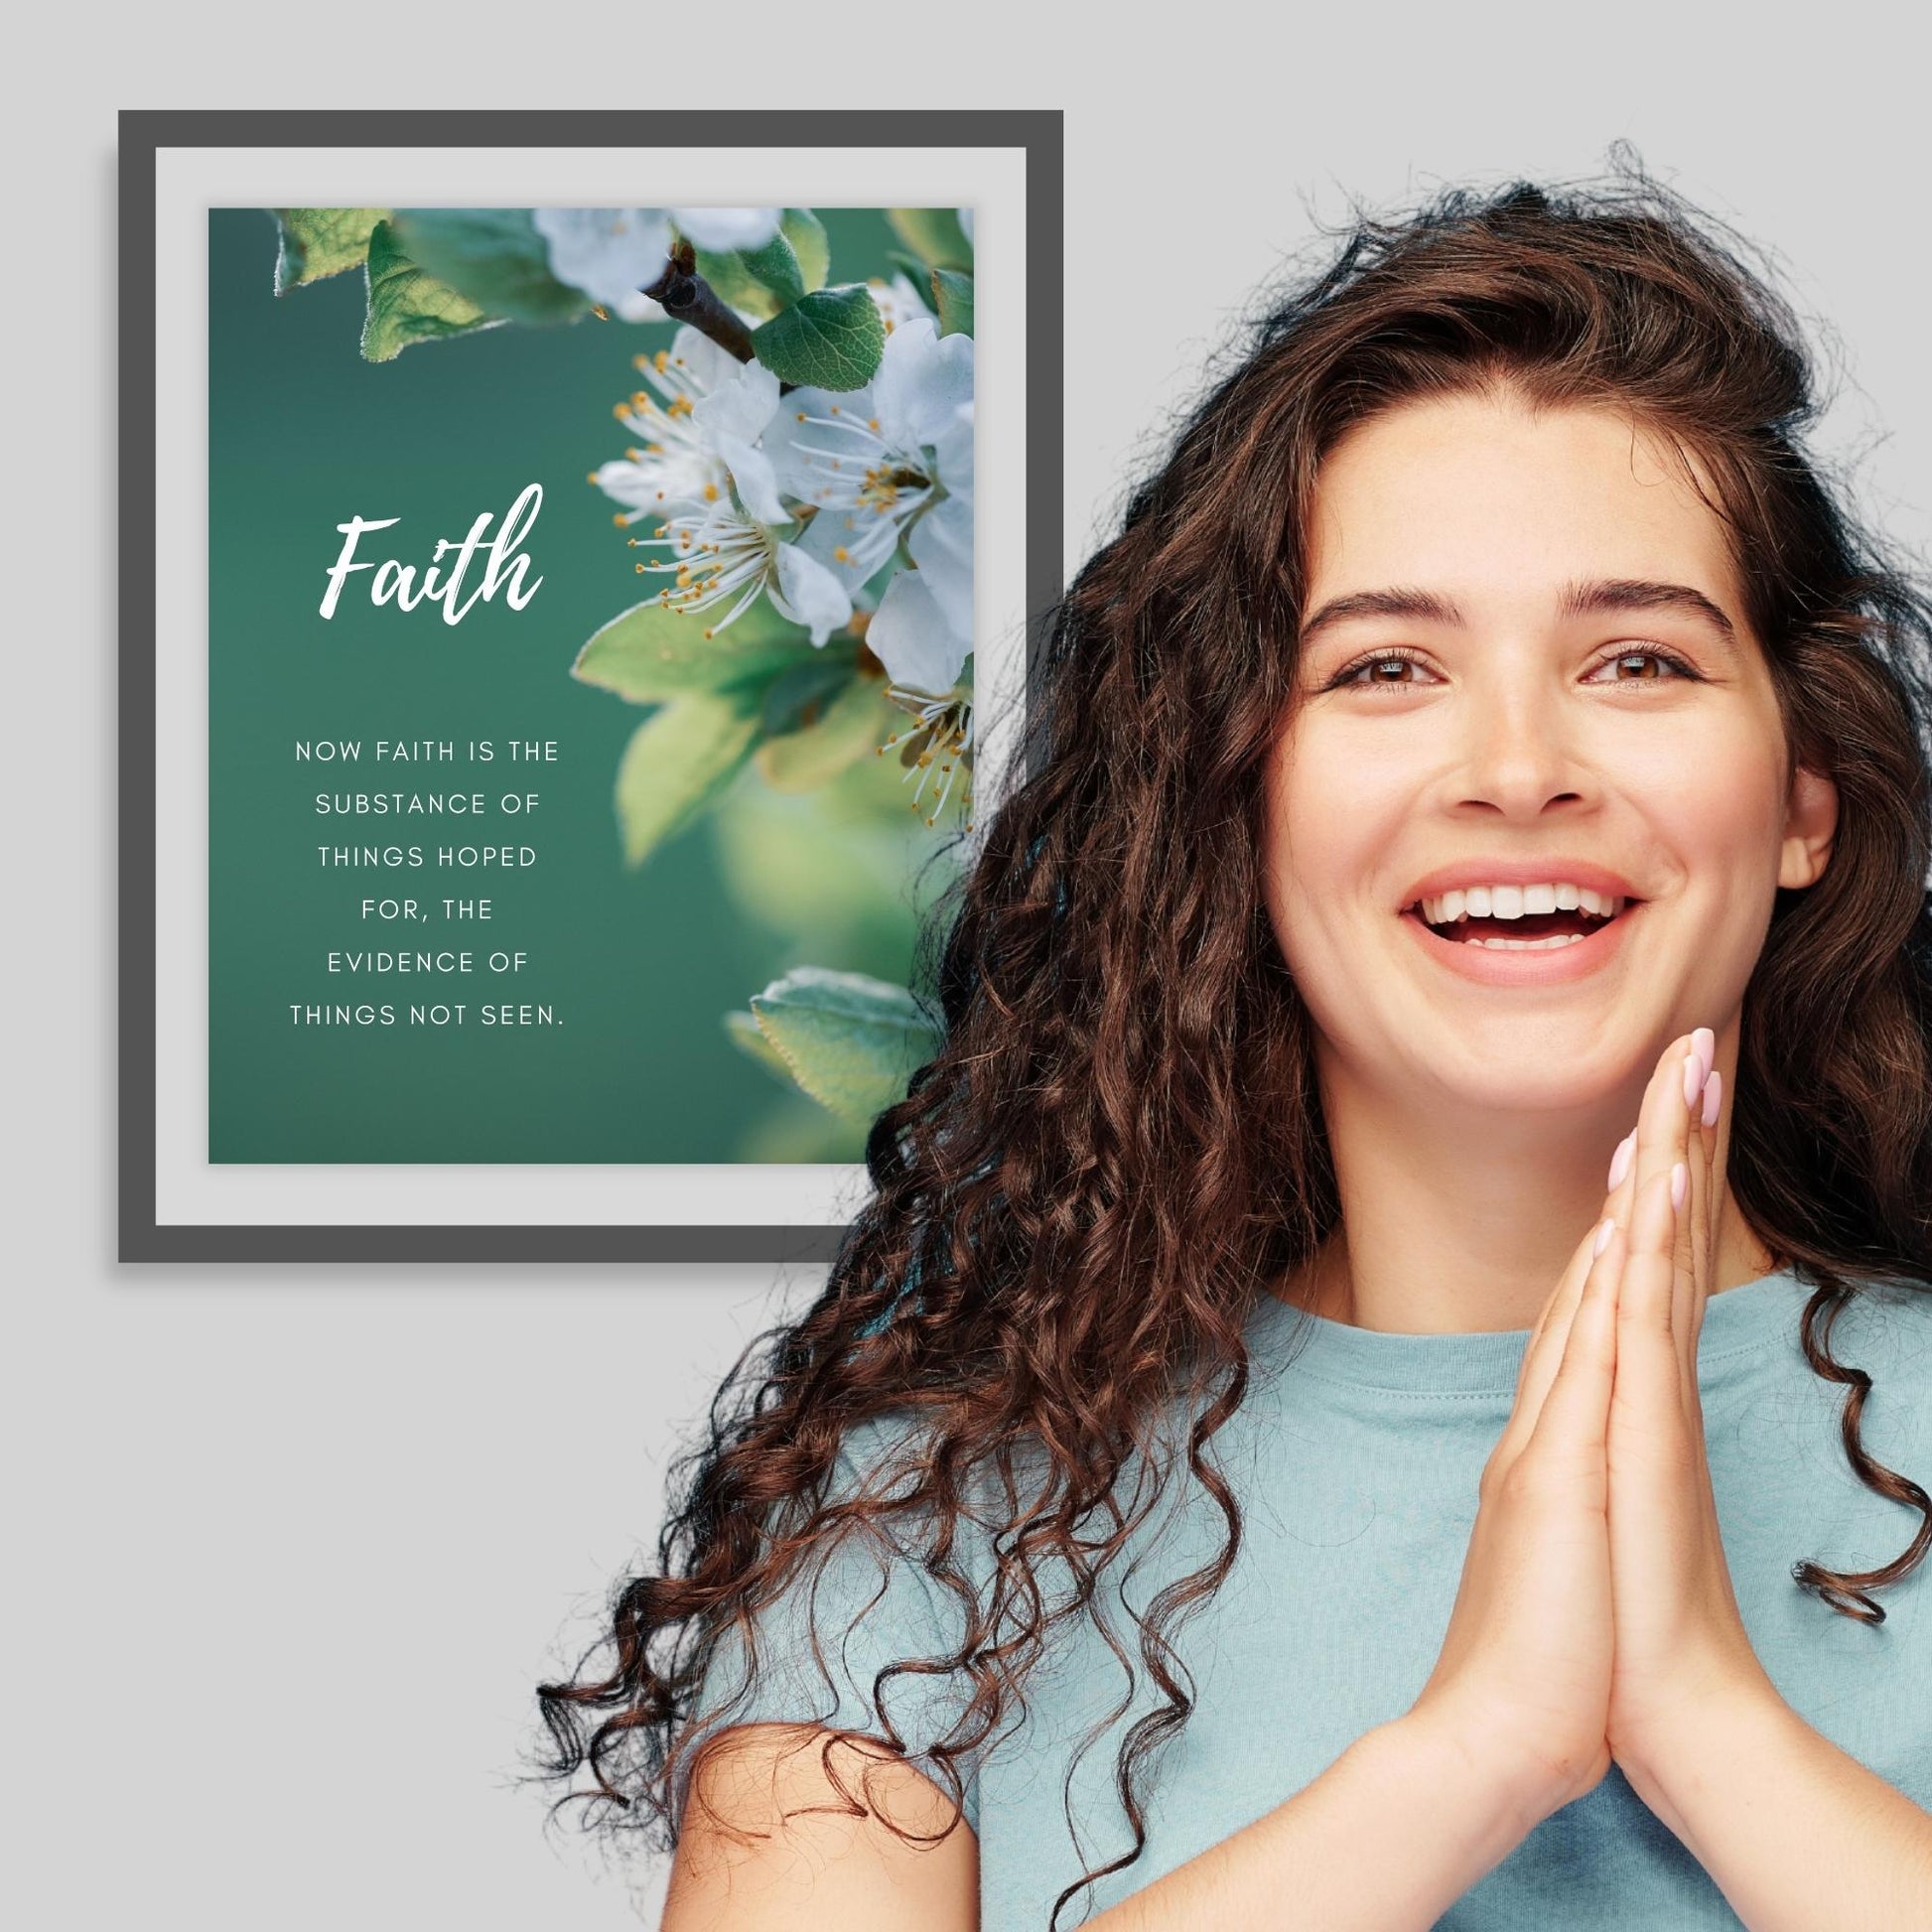 Inspirational Word Art - Faith | Now Faith is the Substance of Things Hoped For, the Evidence of Things Not Seen. (Hebrews 11:1) - Wall Decor (8x10 print) | Shown in grey frame next to faith filled woman | oak7west.com